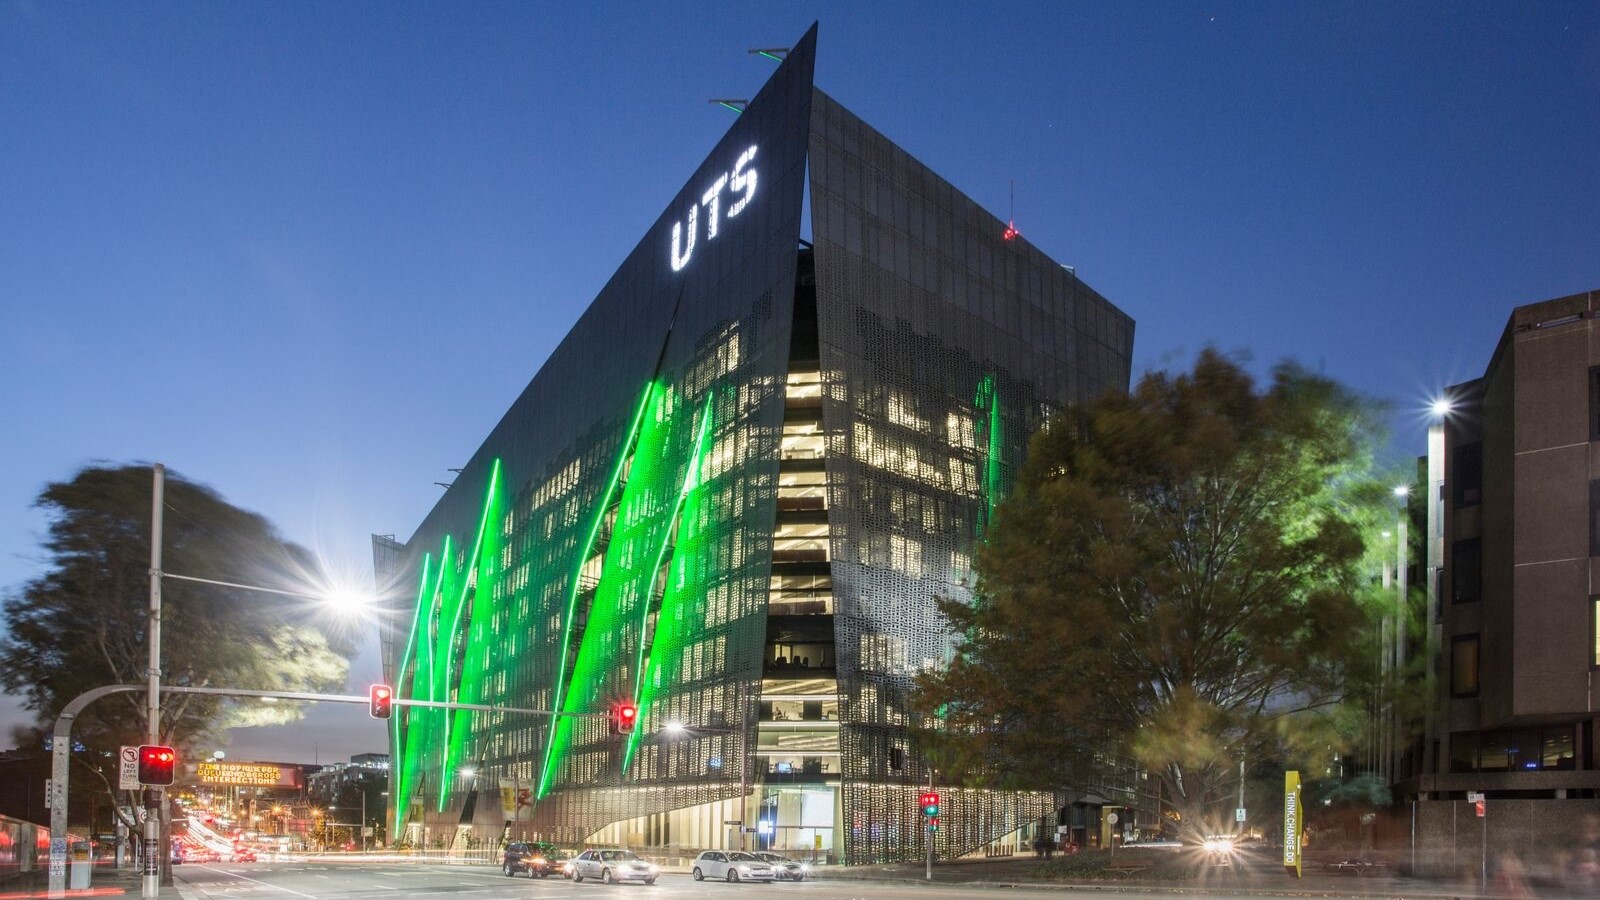 The UTS Faculty of Engineering and IT building